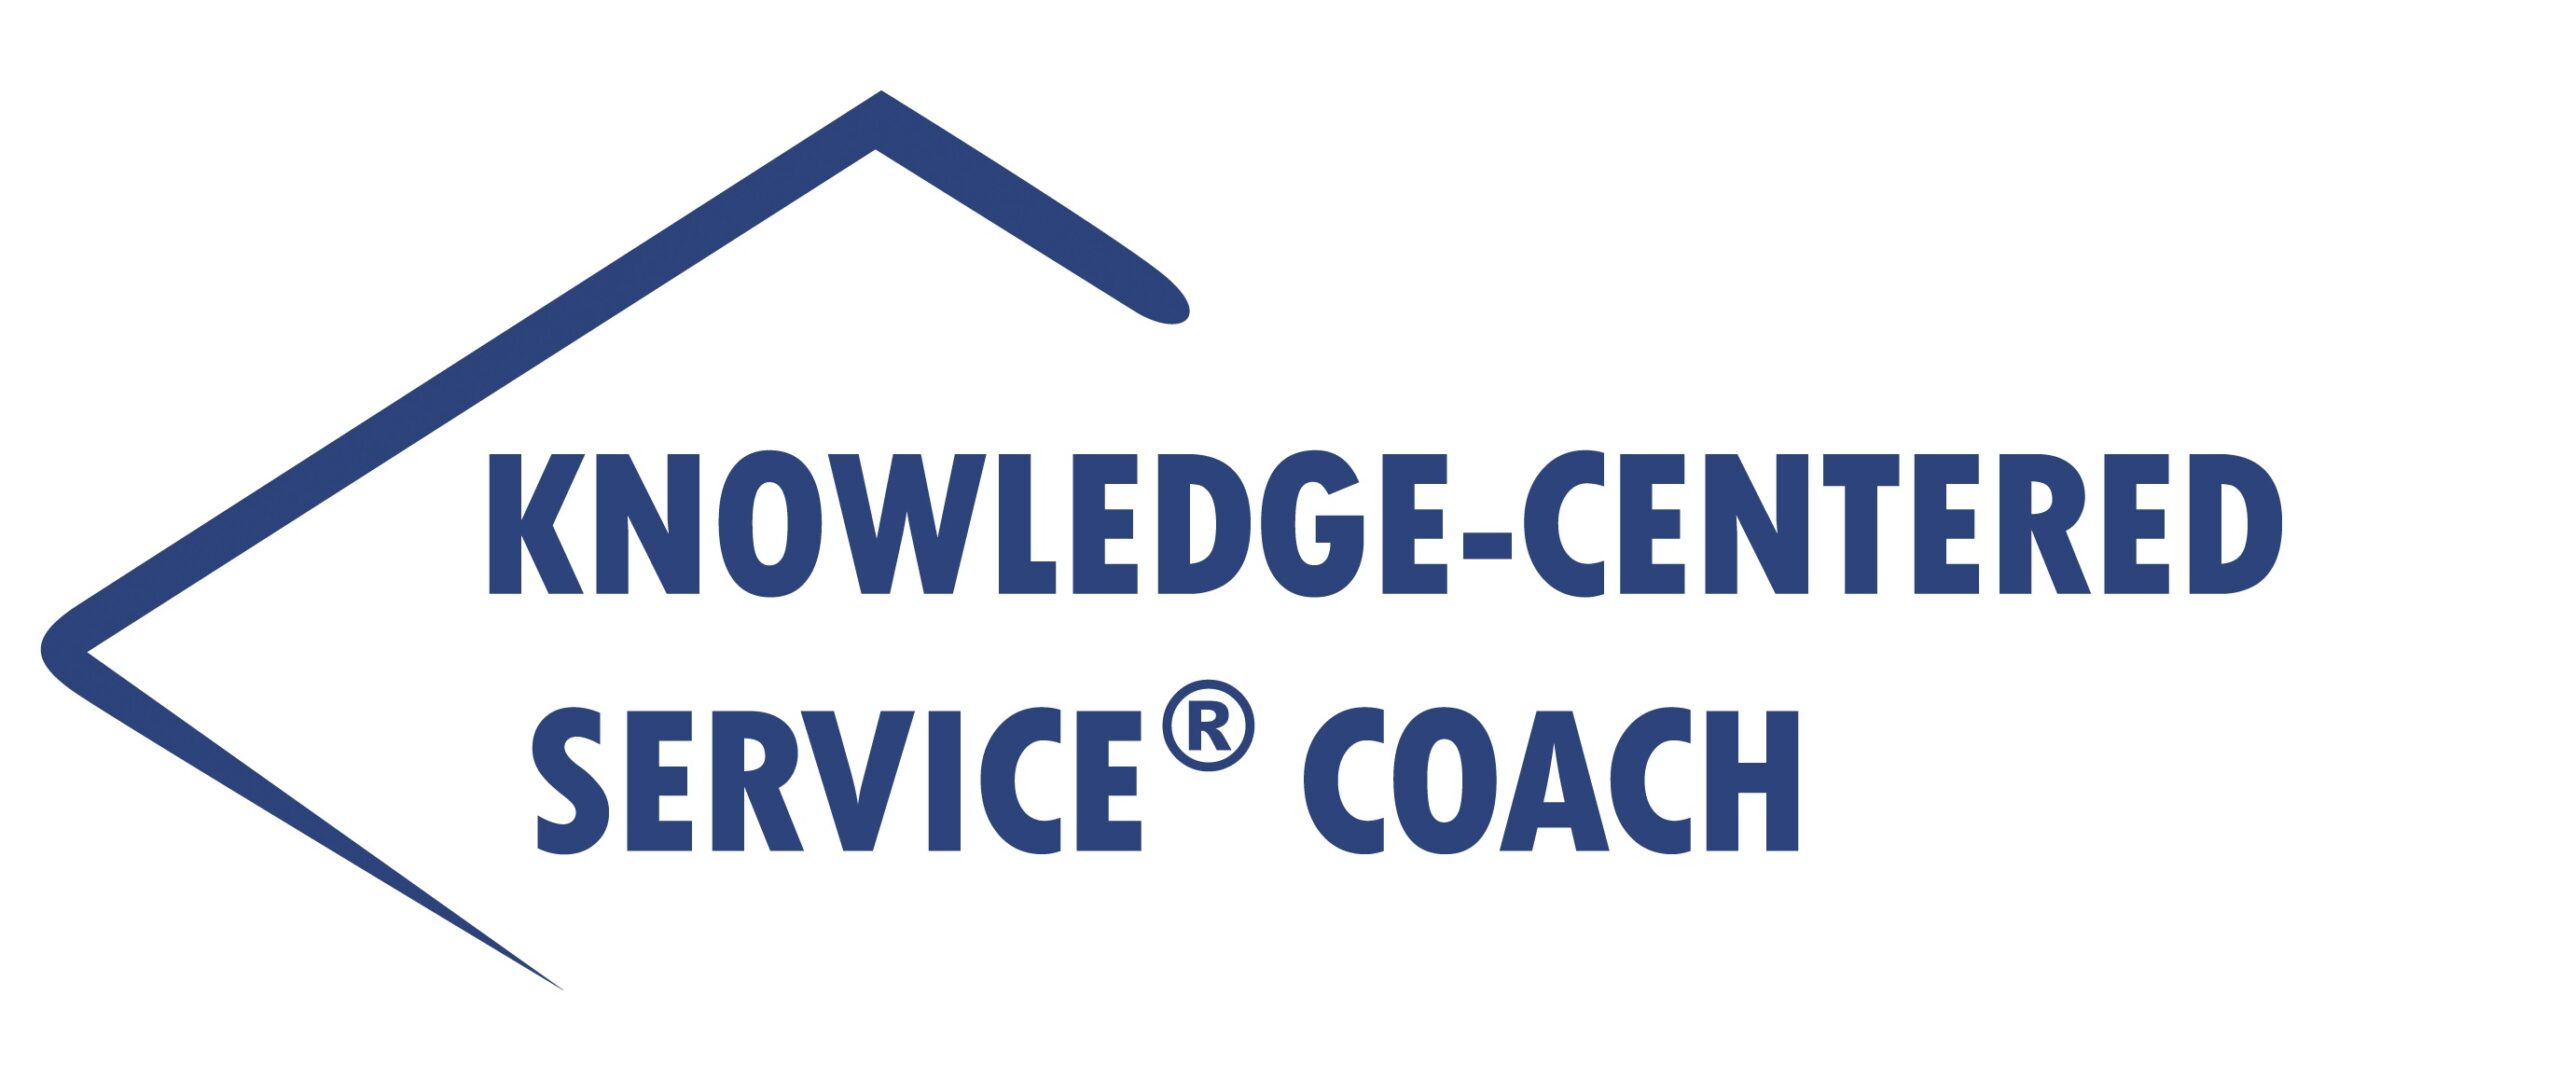 Knowledge-Centered Service v6 Coach Class